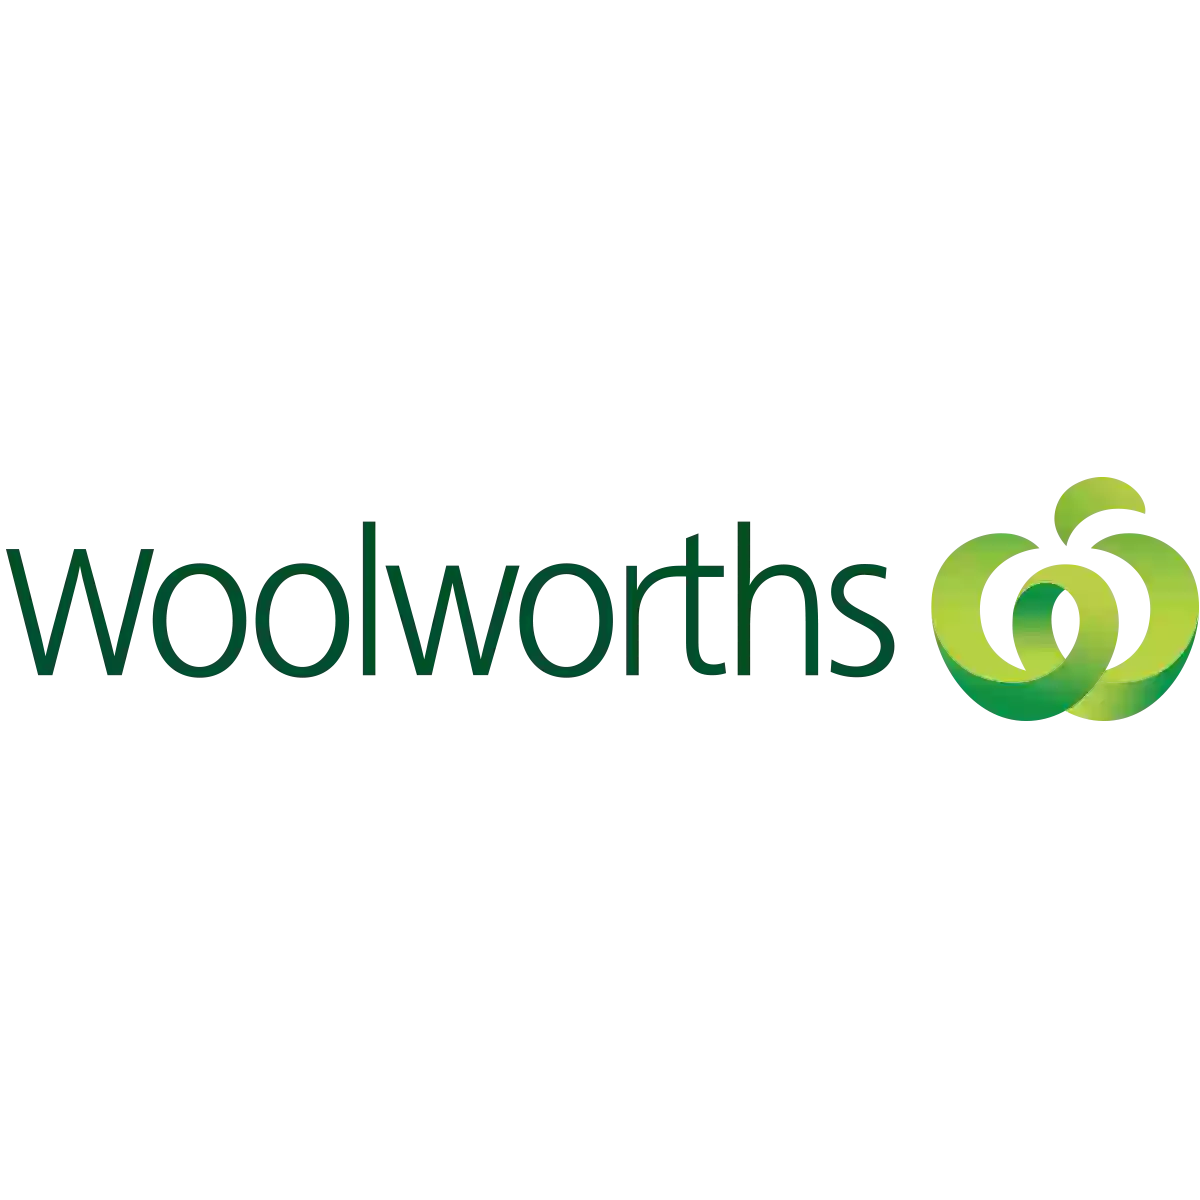 Woolworths Werribee Central